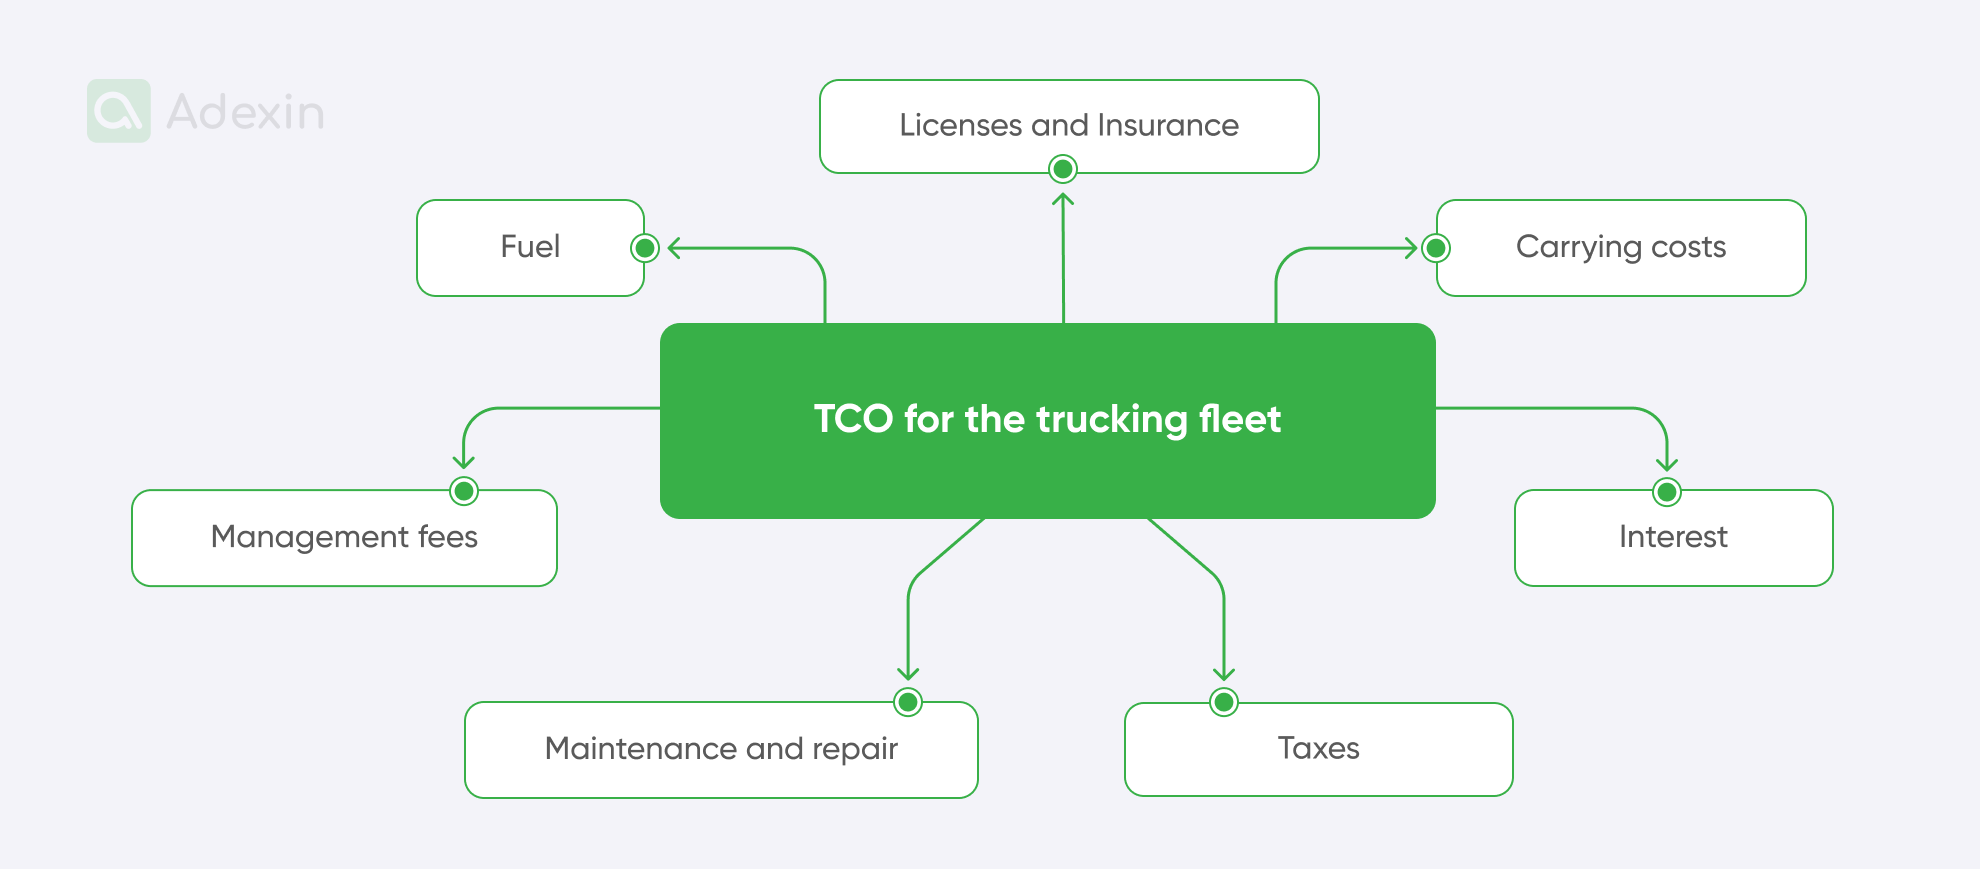 Elements of the TCO for the trucking fleet